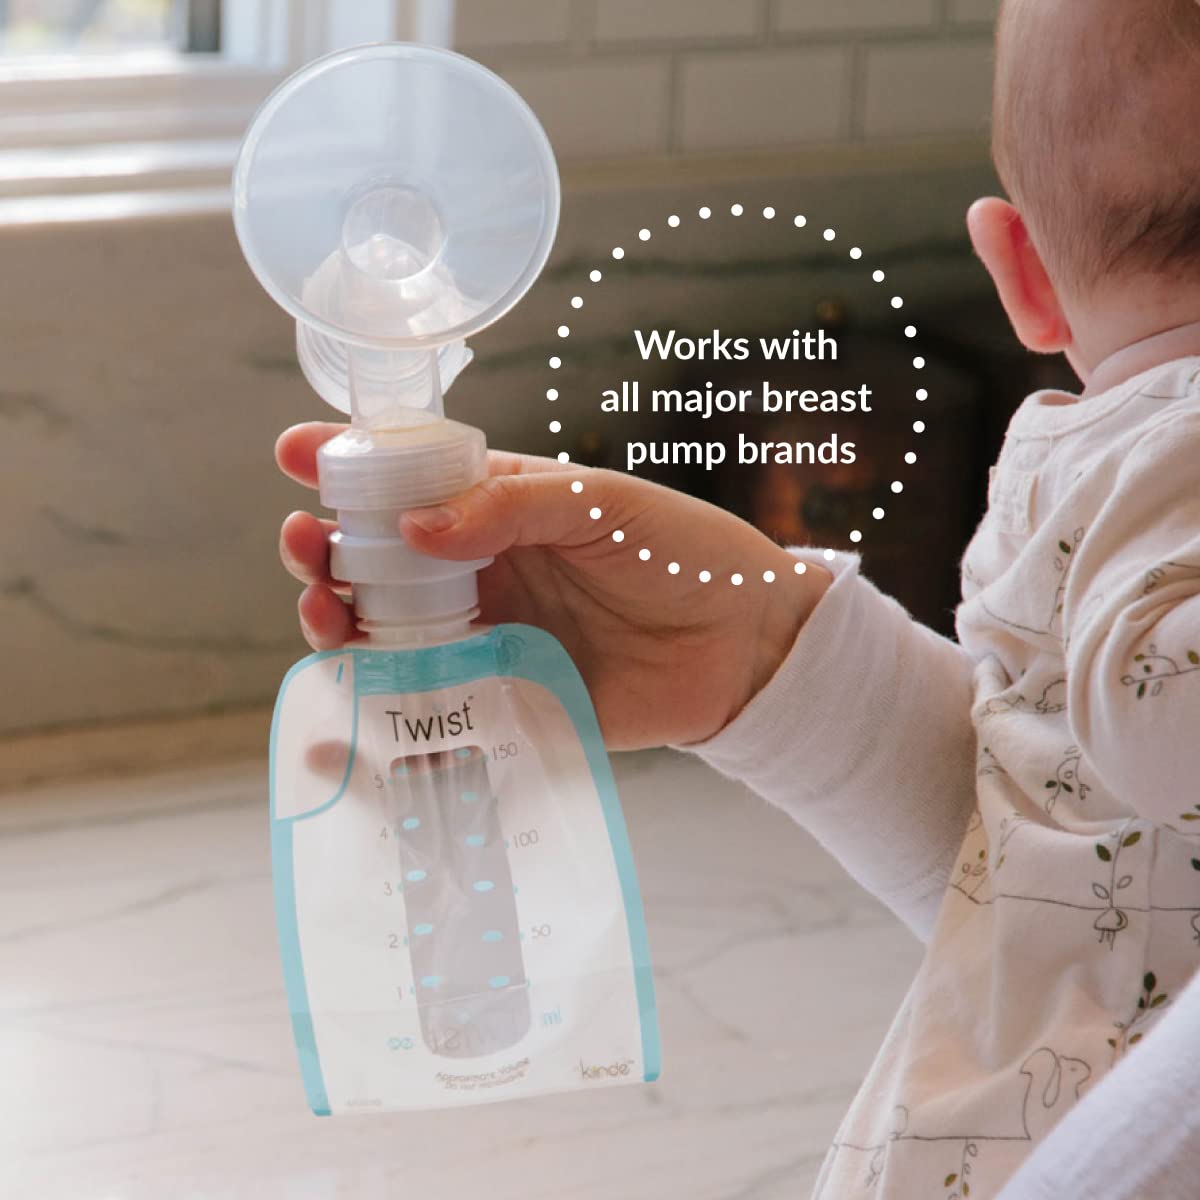 Kiinde Twist Milk Storage Bag Breast Pump and Baby Bottle Direct Pump Adapter Kit for All Major Breast Pump Brands, Leak-Free, Transfer-Free Pumping Directly Into Bag, Multi-Pack